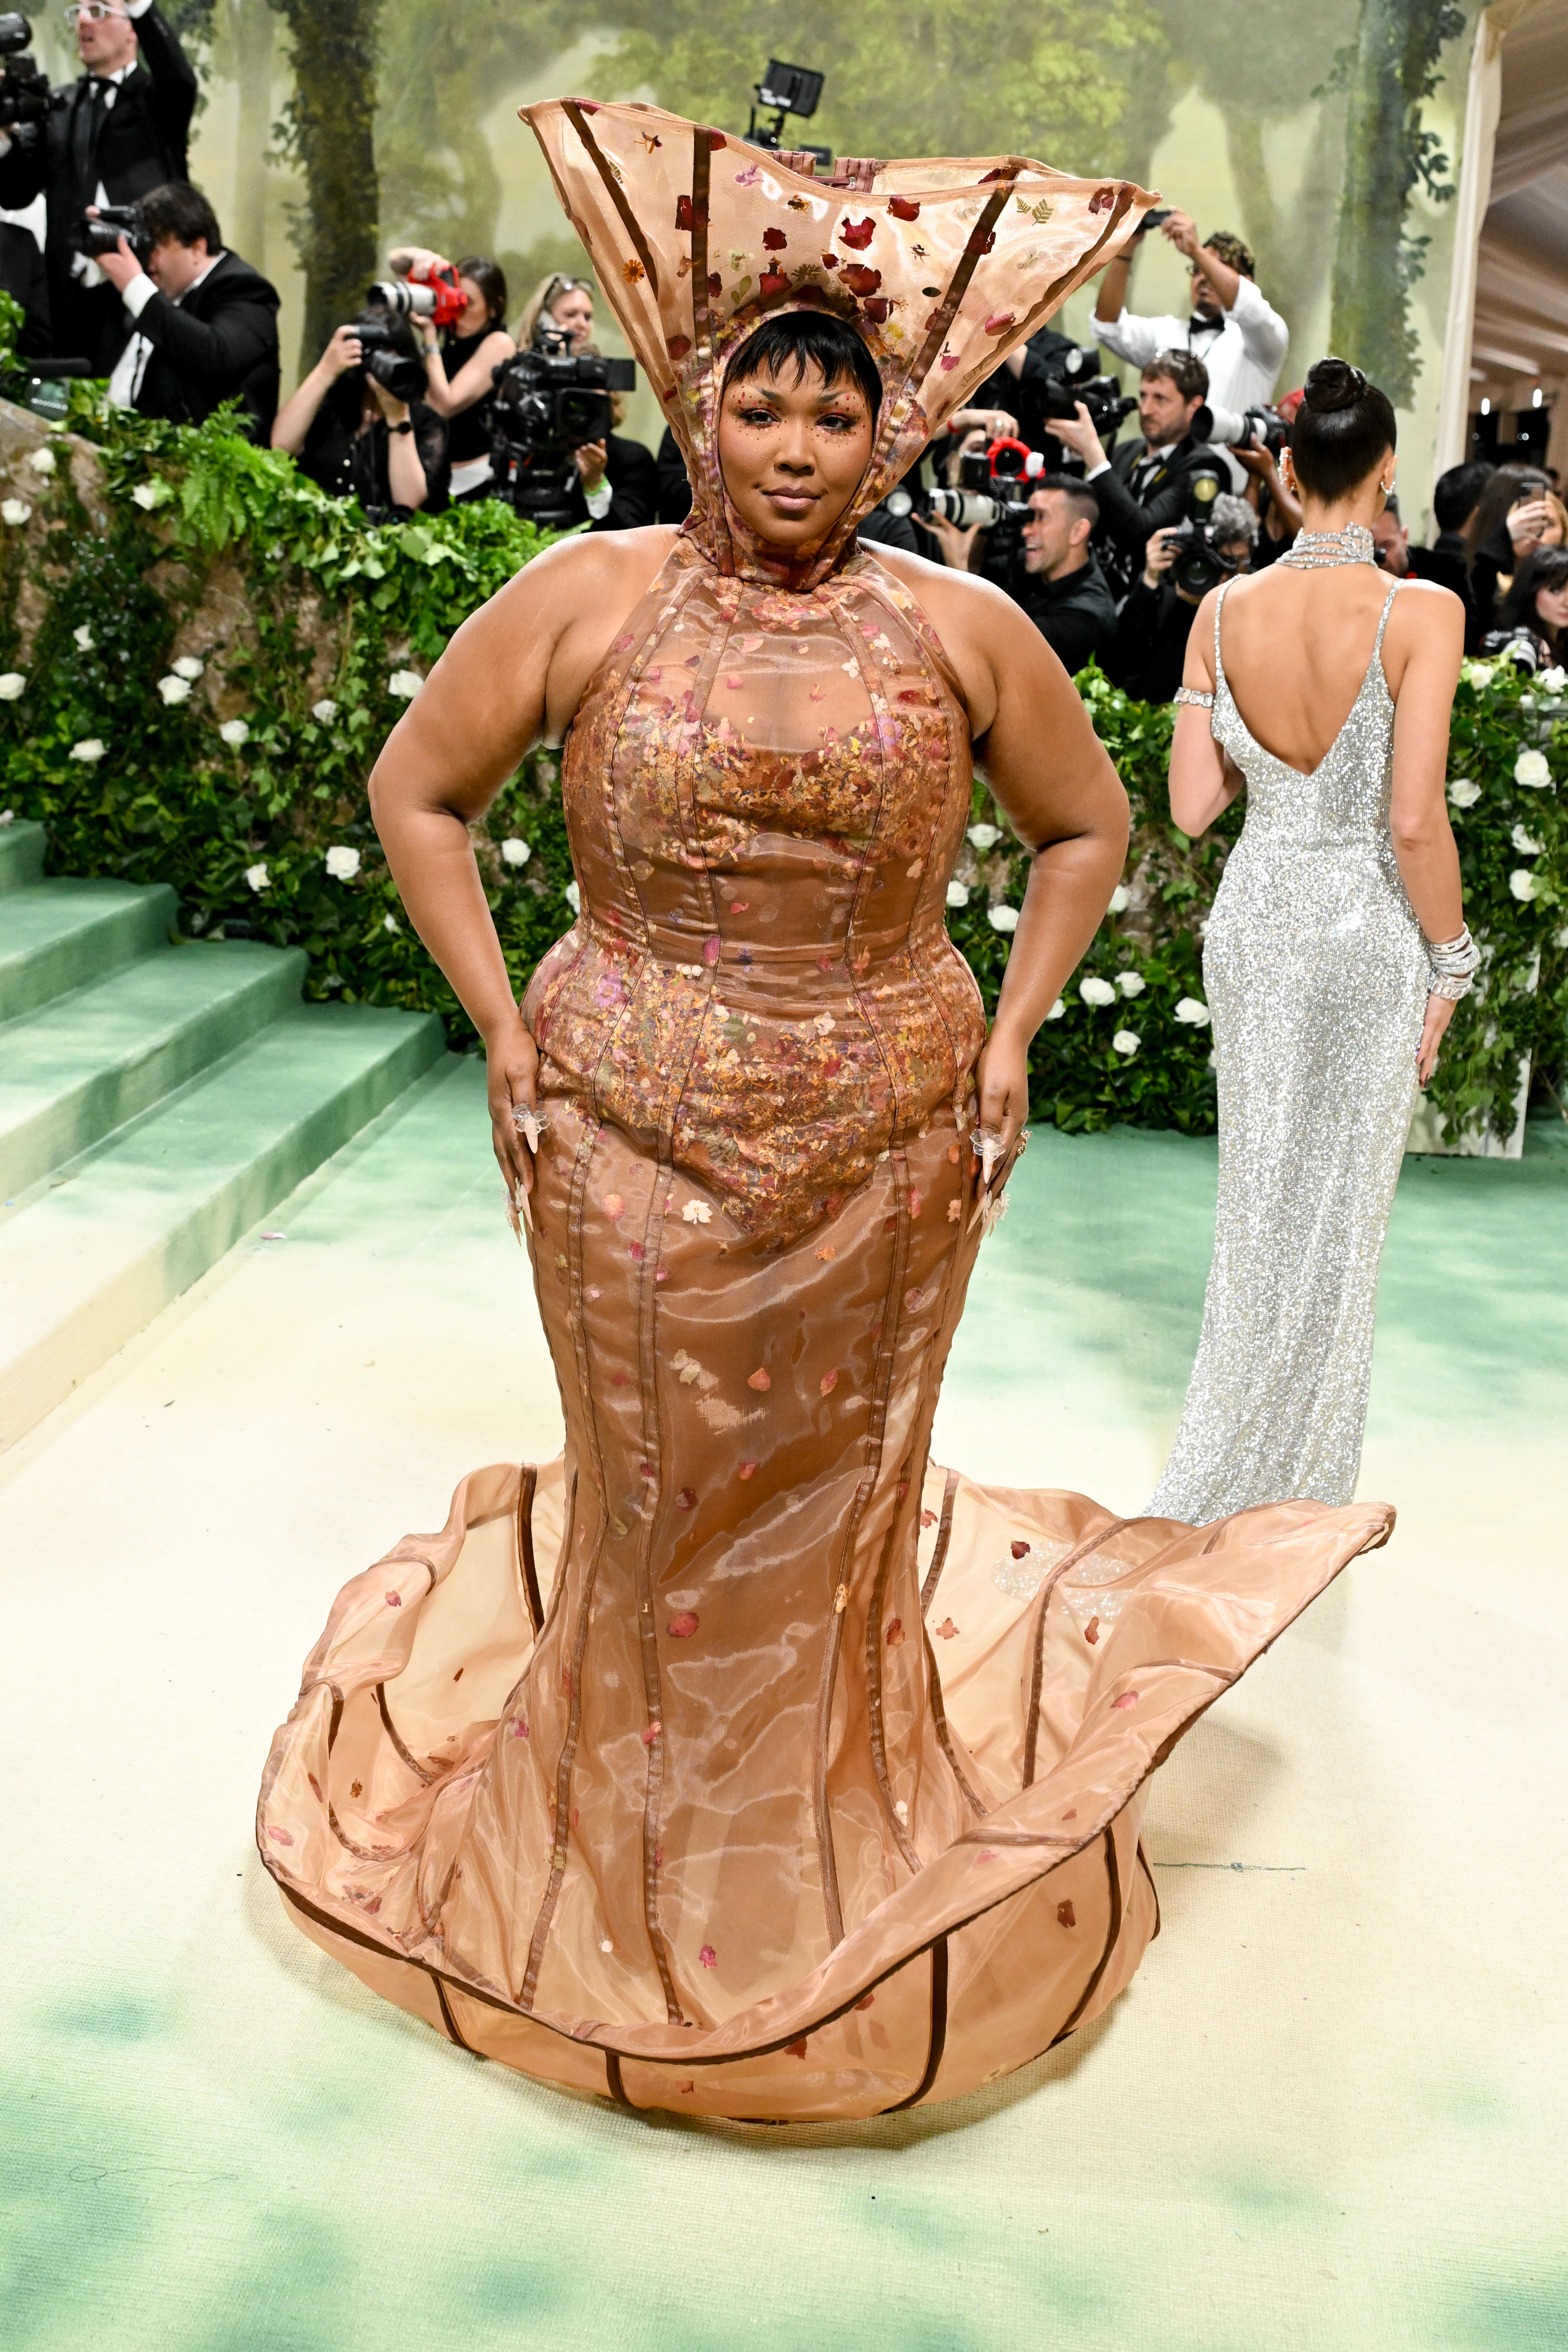 Lizzo in a flamboyant gown with oversized ruffled collar, posing on stairs at an event. Behind her, another guest in a sleek gown